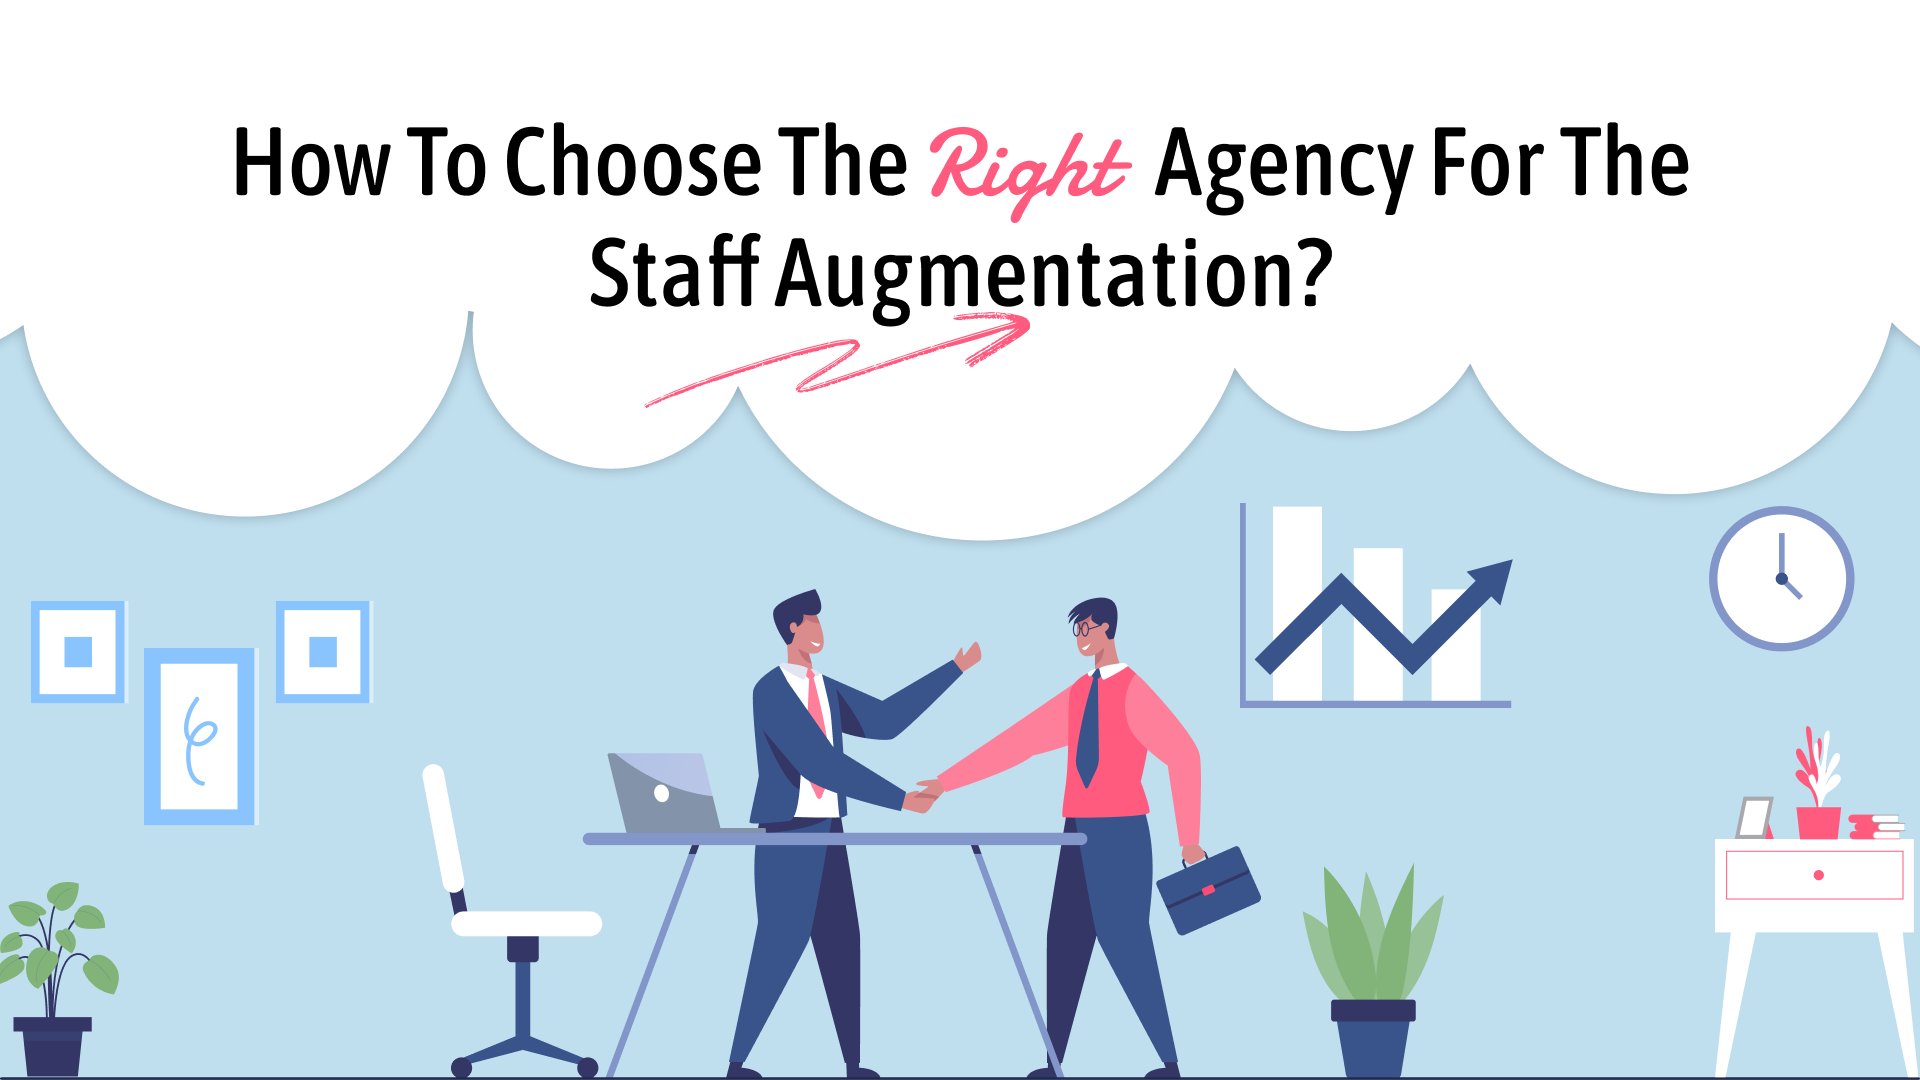 How To Choose The Right Agency For The Staff Augmentation